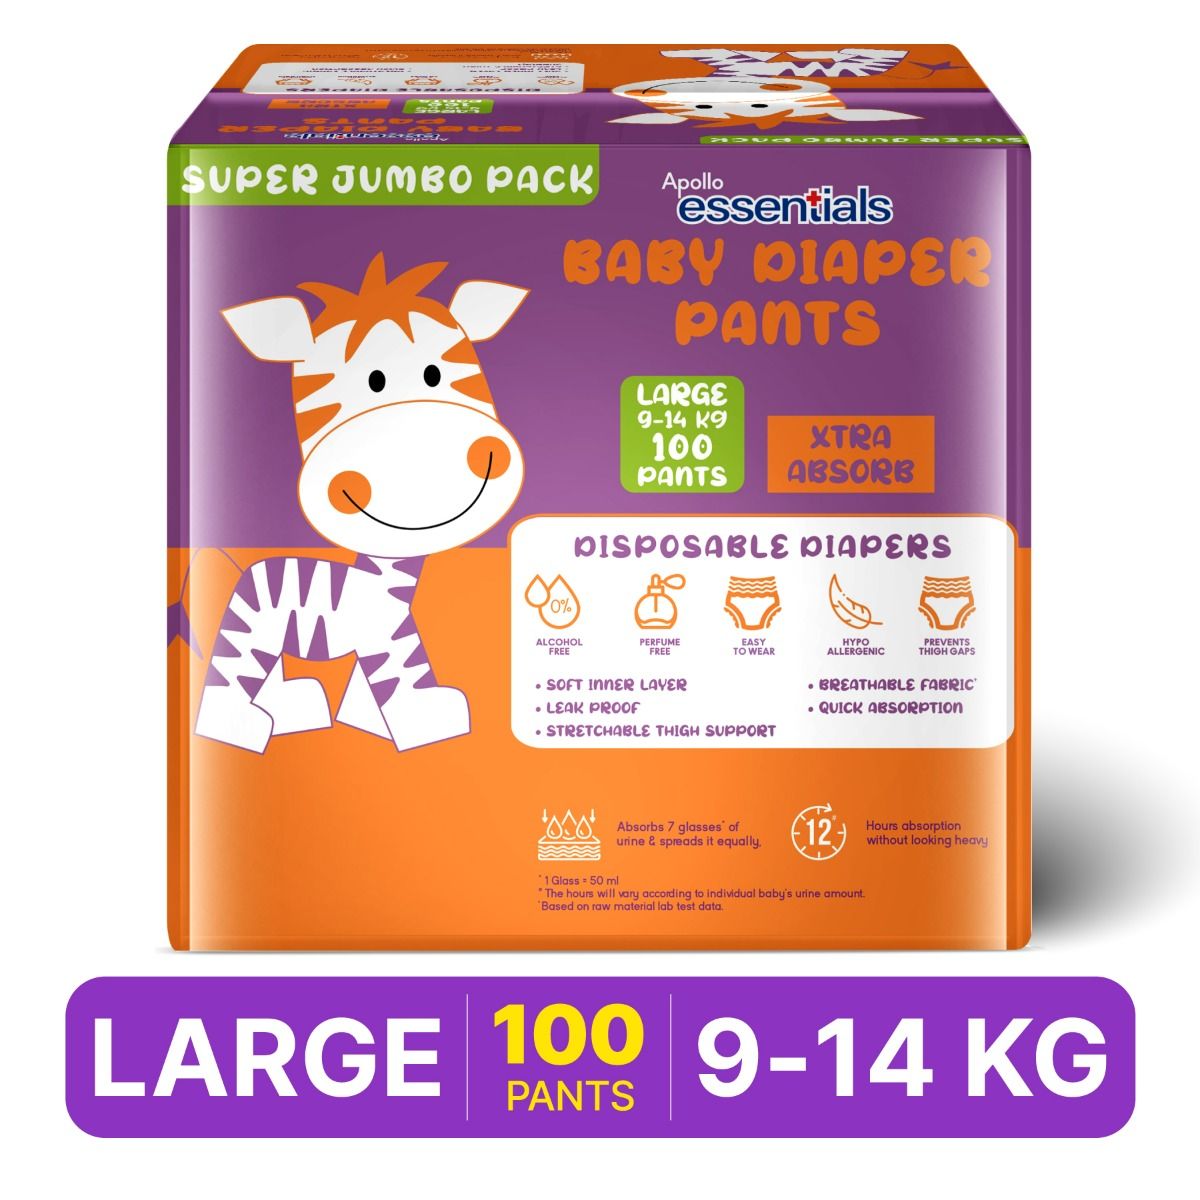 Buy BUMTUM BABY DIAPER PANTS, XXXL 48 COUNT, DOUBLE LAYER LEAKAGE  PROTECTION (PACK OF 2) Online & Get Upto 60% OFF at PharmEasy